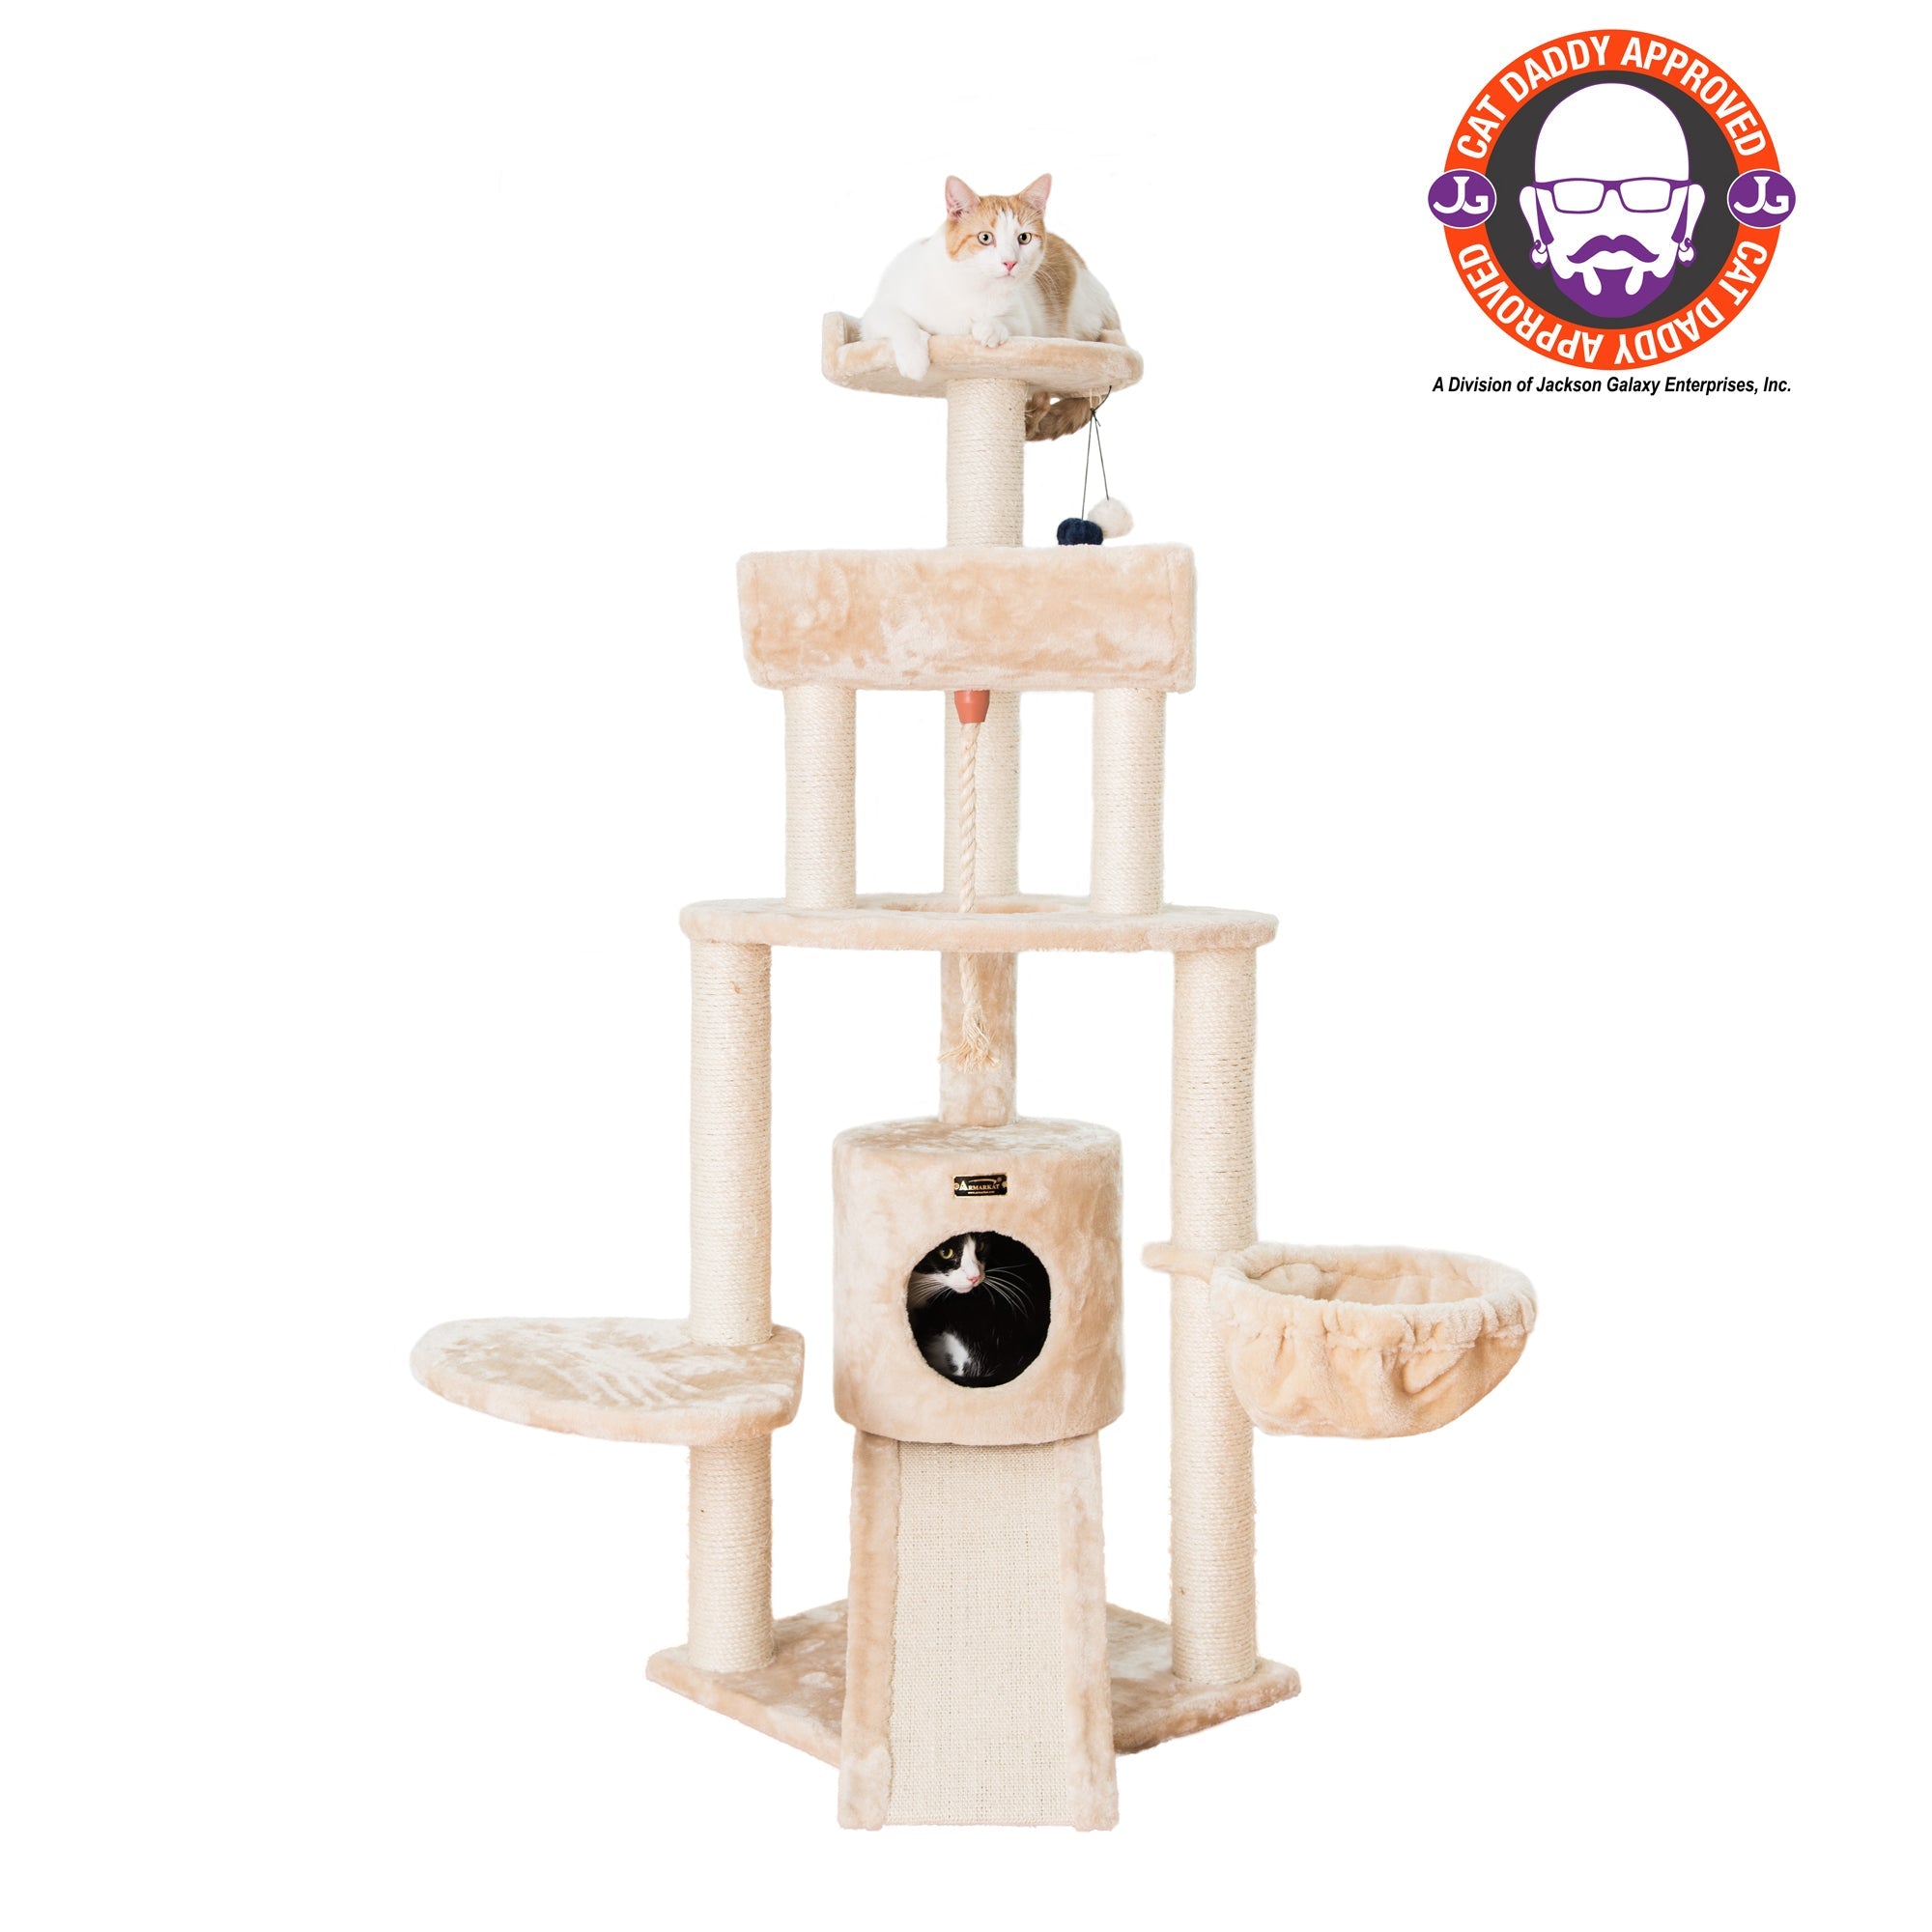 Armarkat Spacious Thick Fur Cat Tower With Basket Lounge, Ramp, Beige A5806